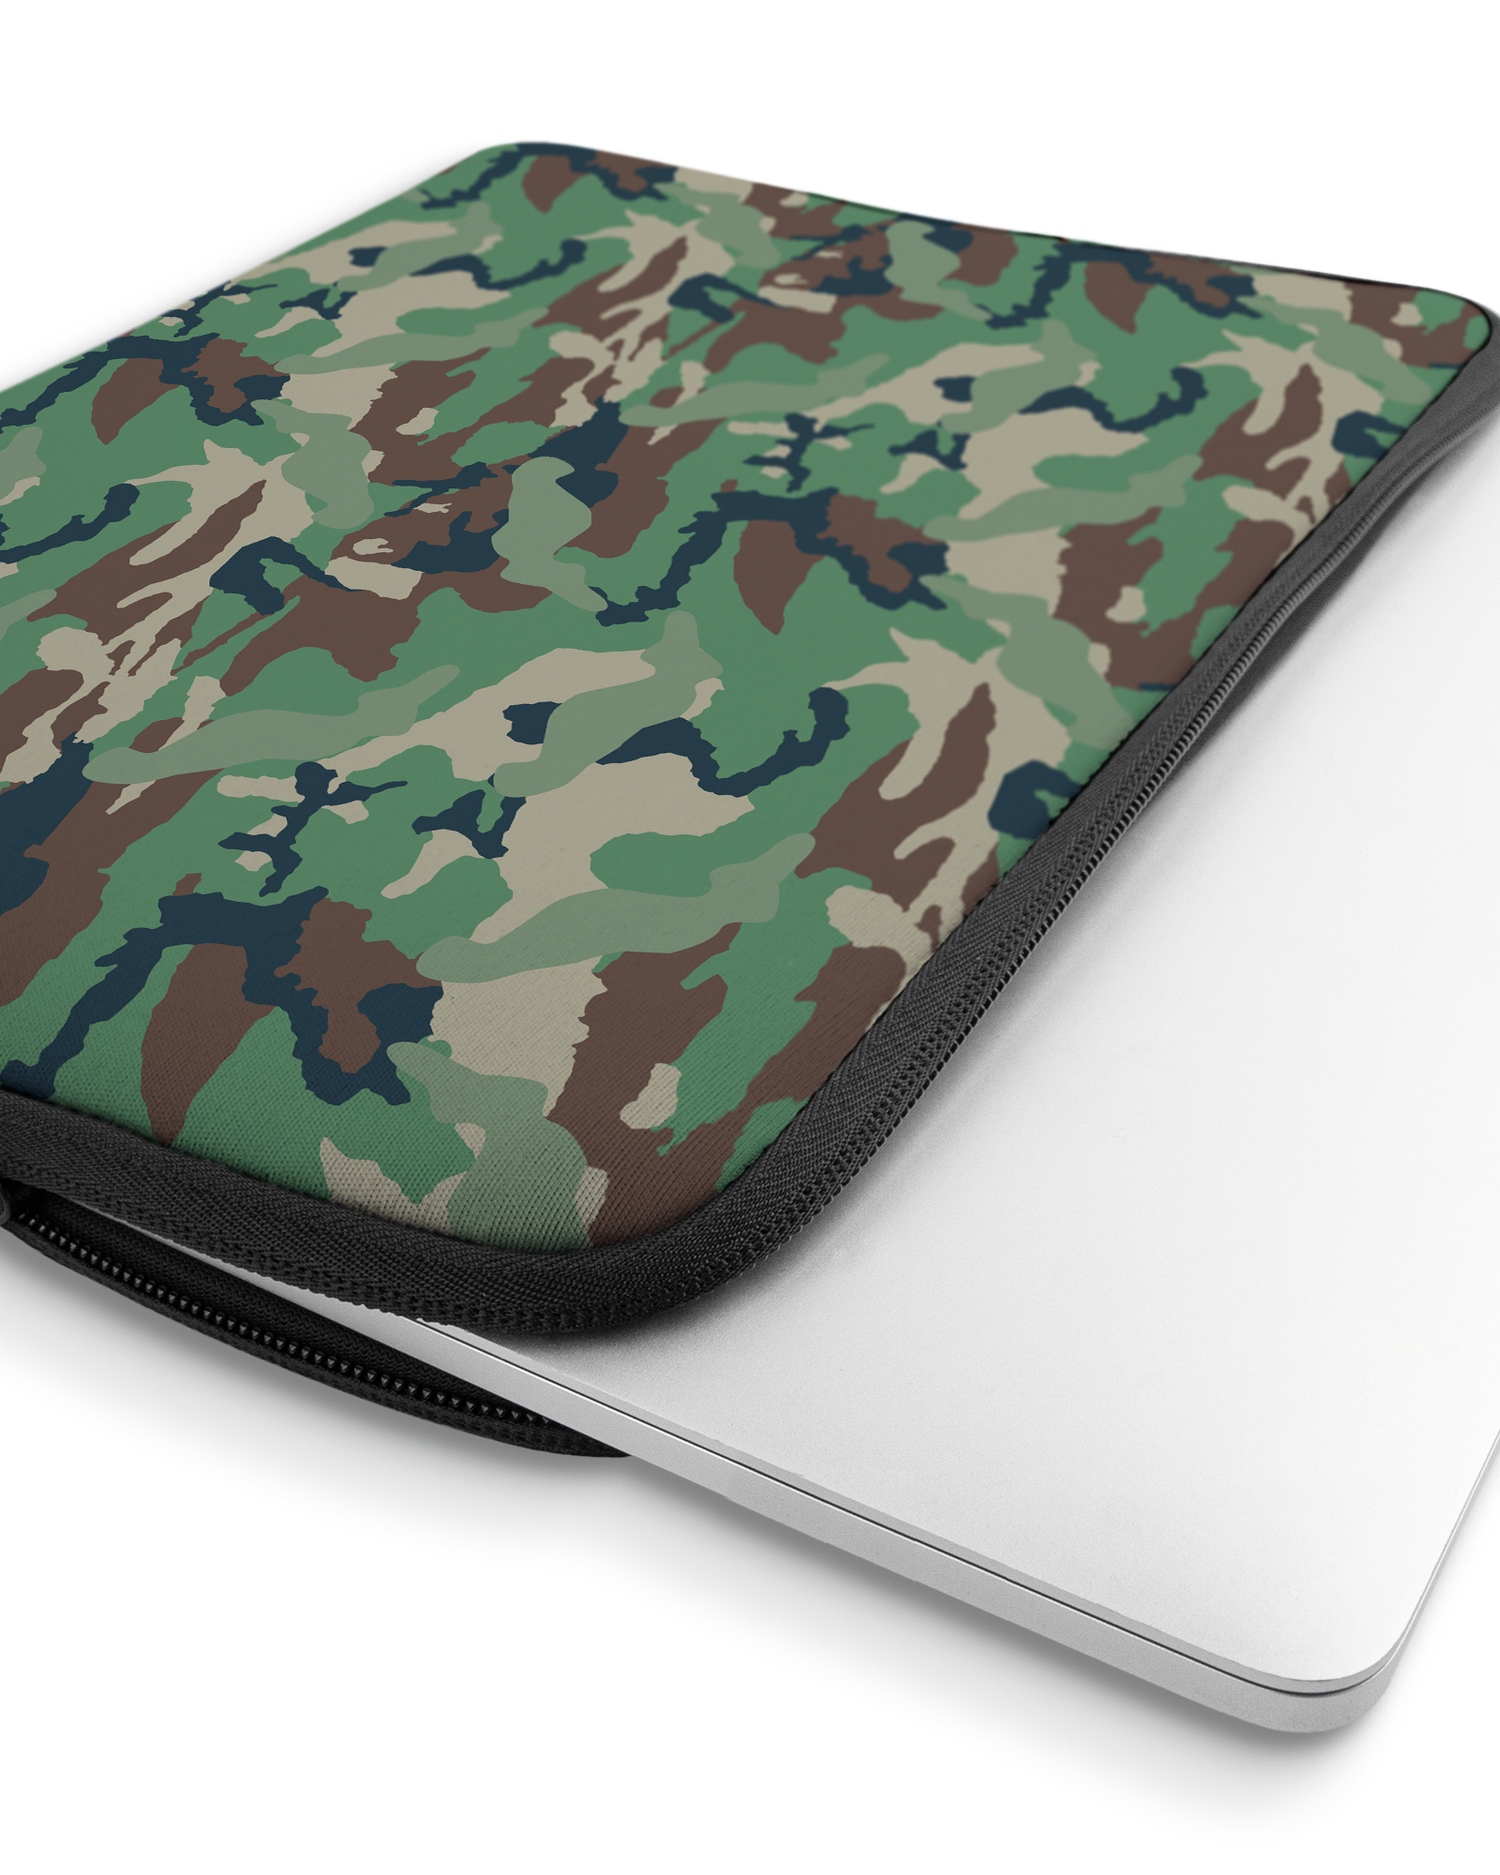 Green and Brown Camo Laptop Case 16 inch with device inside